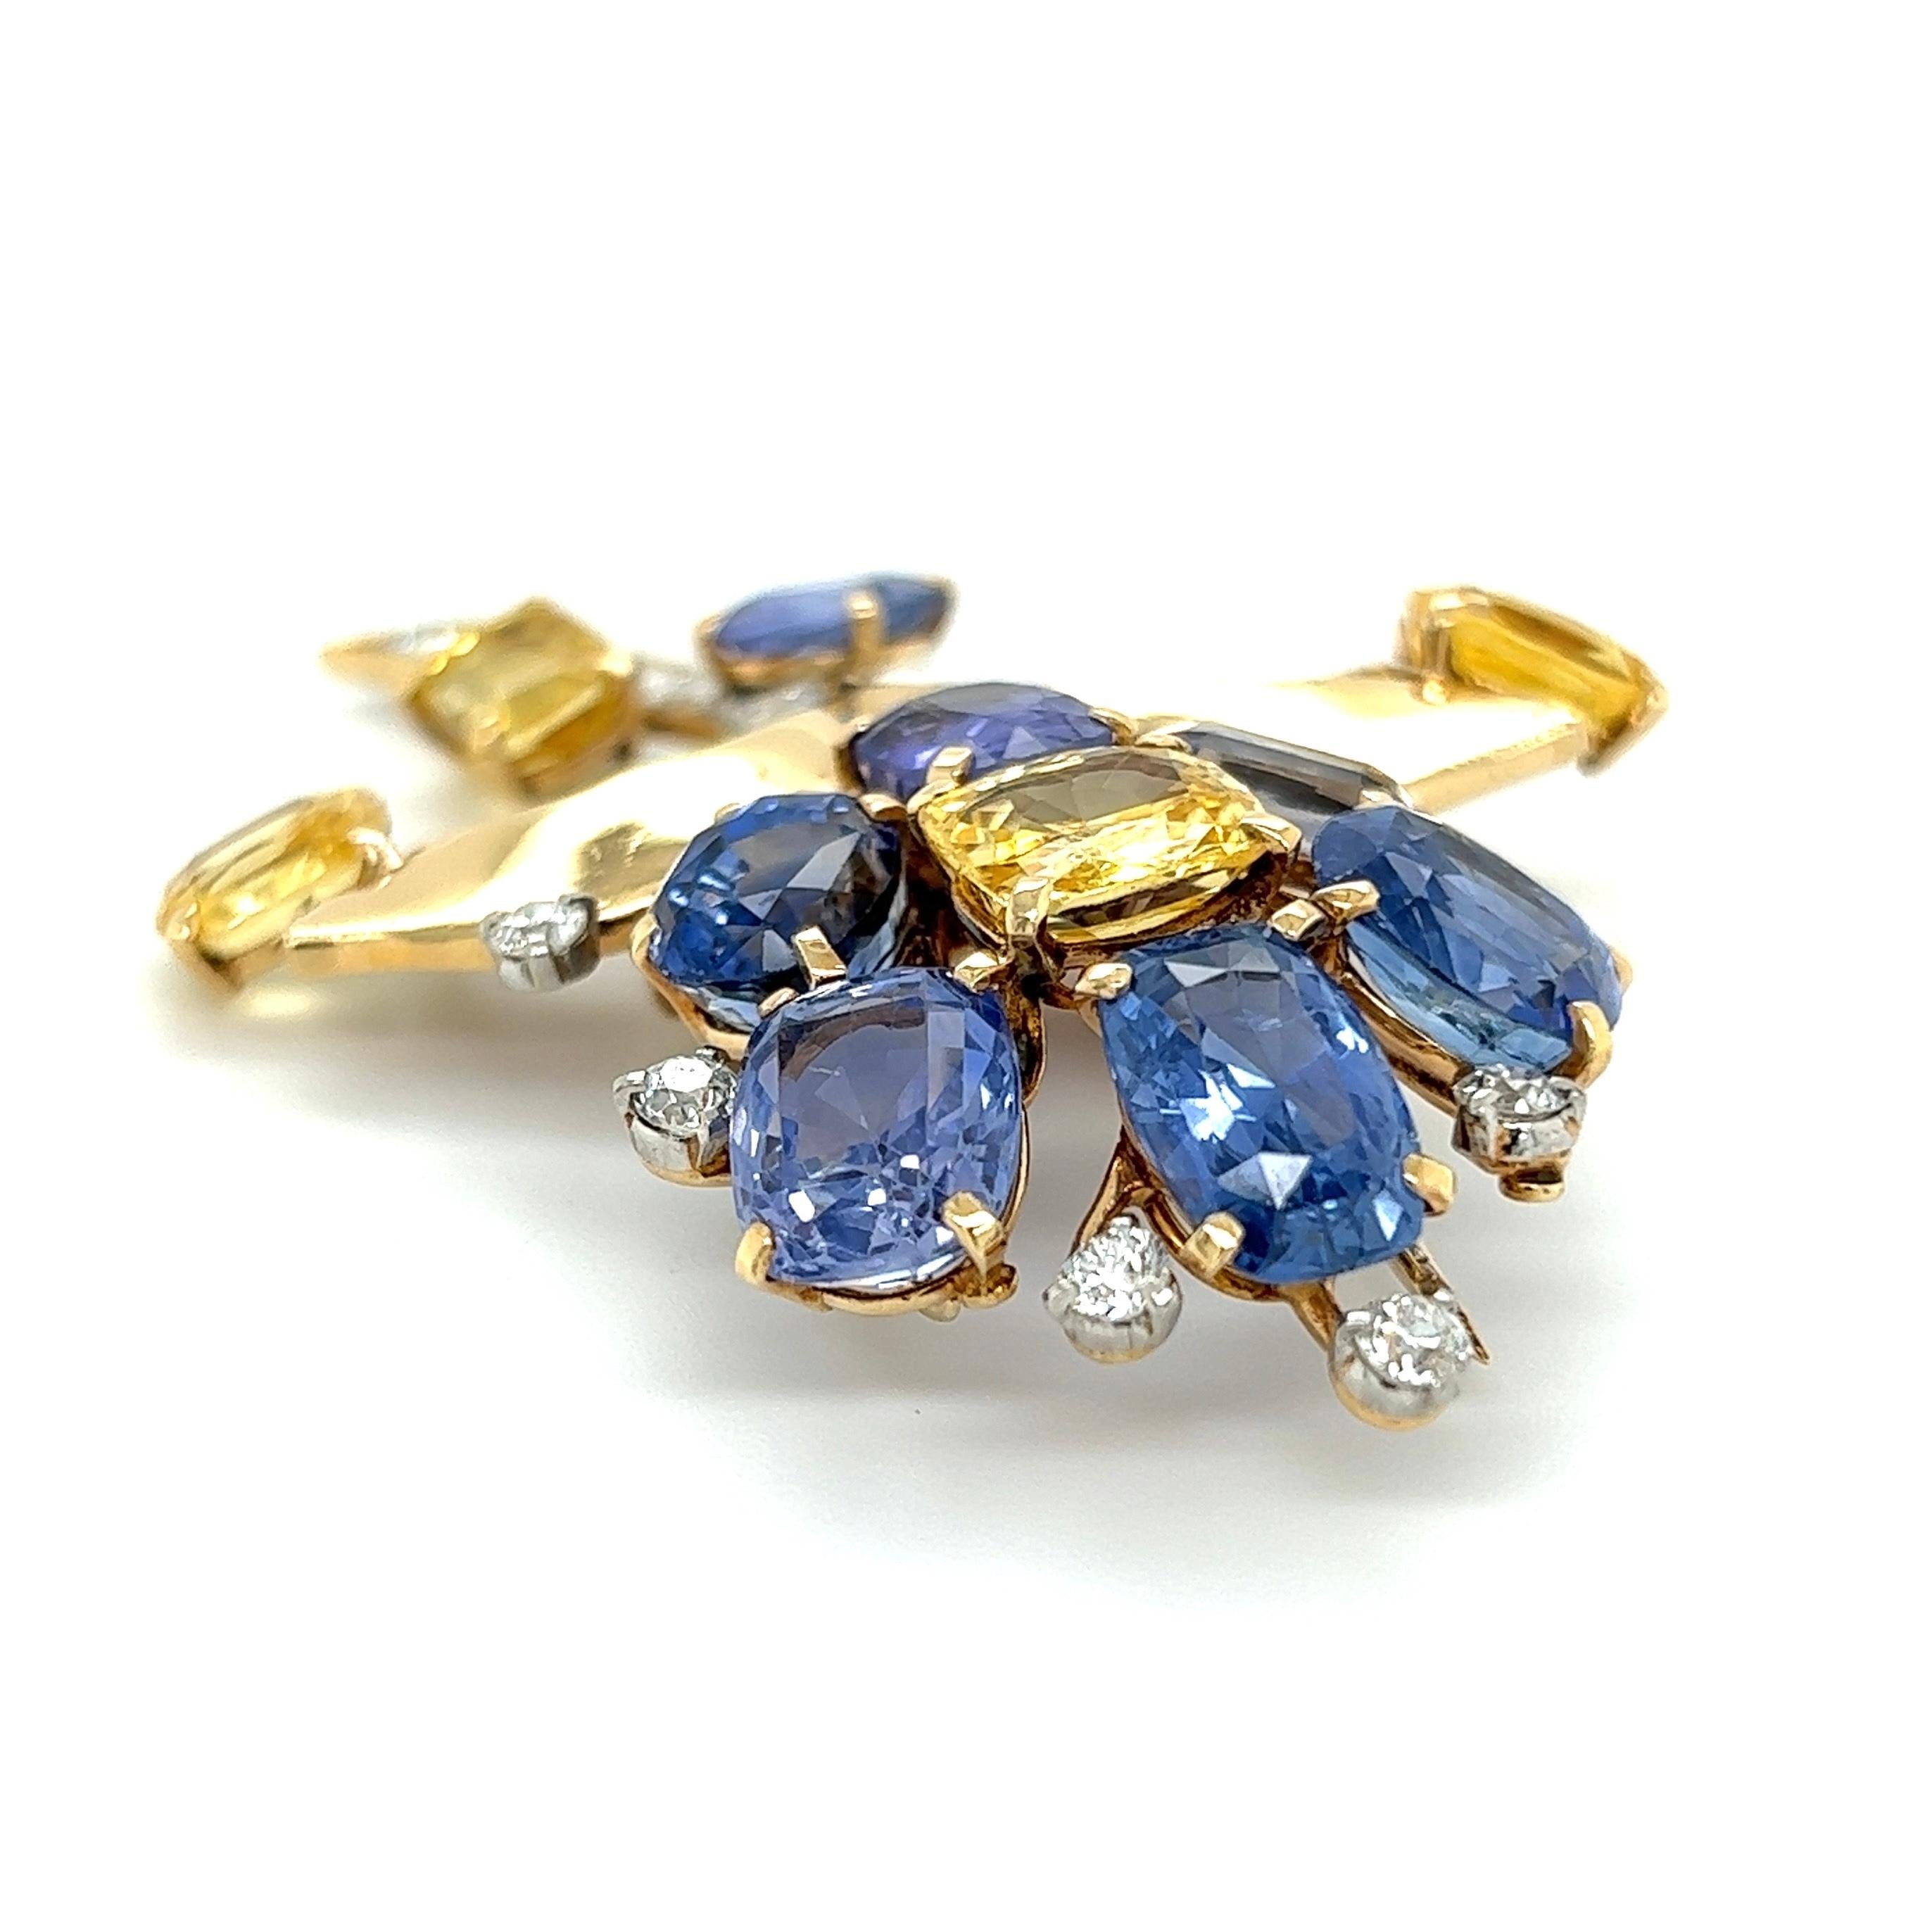 Iconic Cartier Sapphire and Diamond Vintage Brooch Pin Estate Fine Jewelry In Excellent Condition For Sale In Montreal, QC